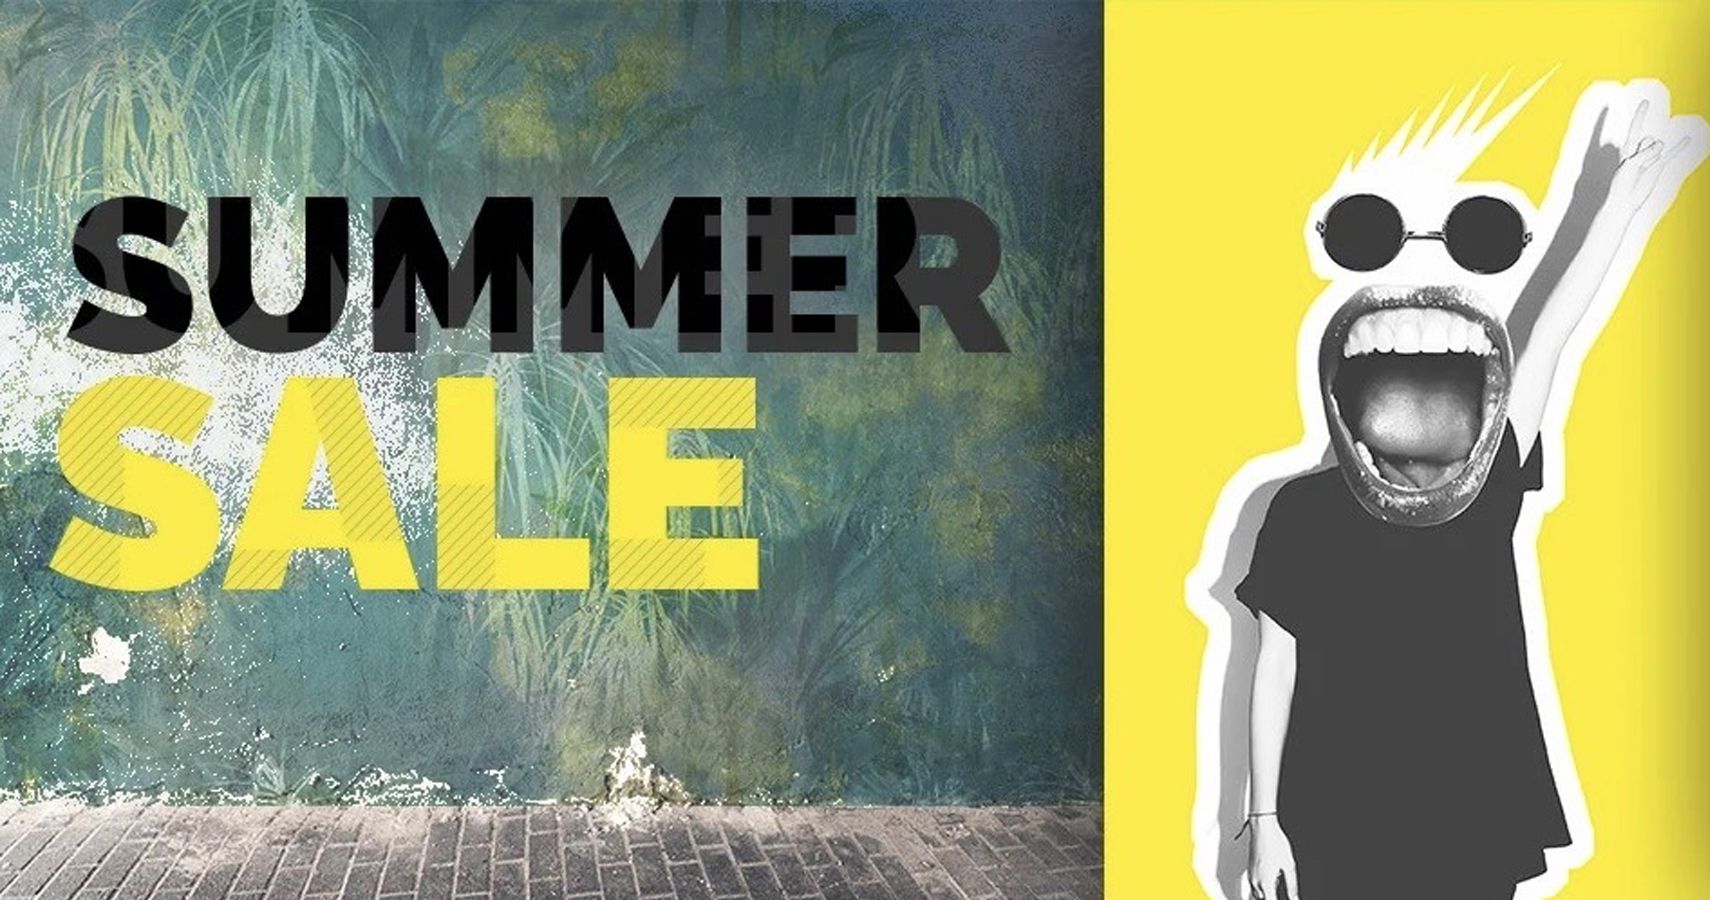 Green Man Gaming's Summer Sale Has Deep Discounts On Over 2000 Games